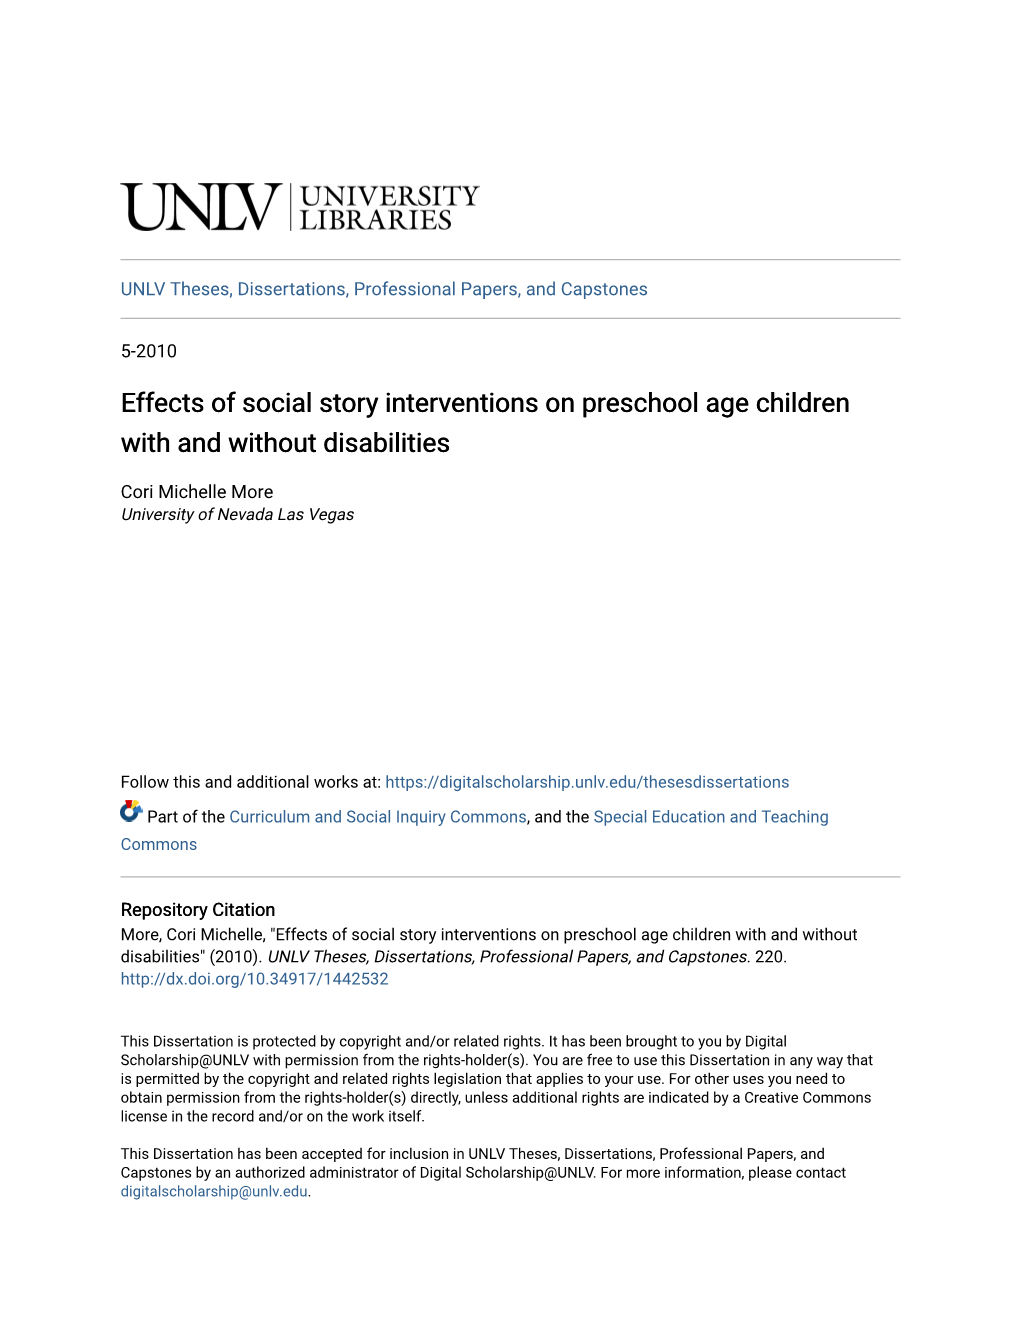 Effects of Social Story Interventions on Preschool Age Children with and Without Disabilities